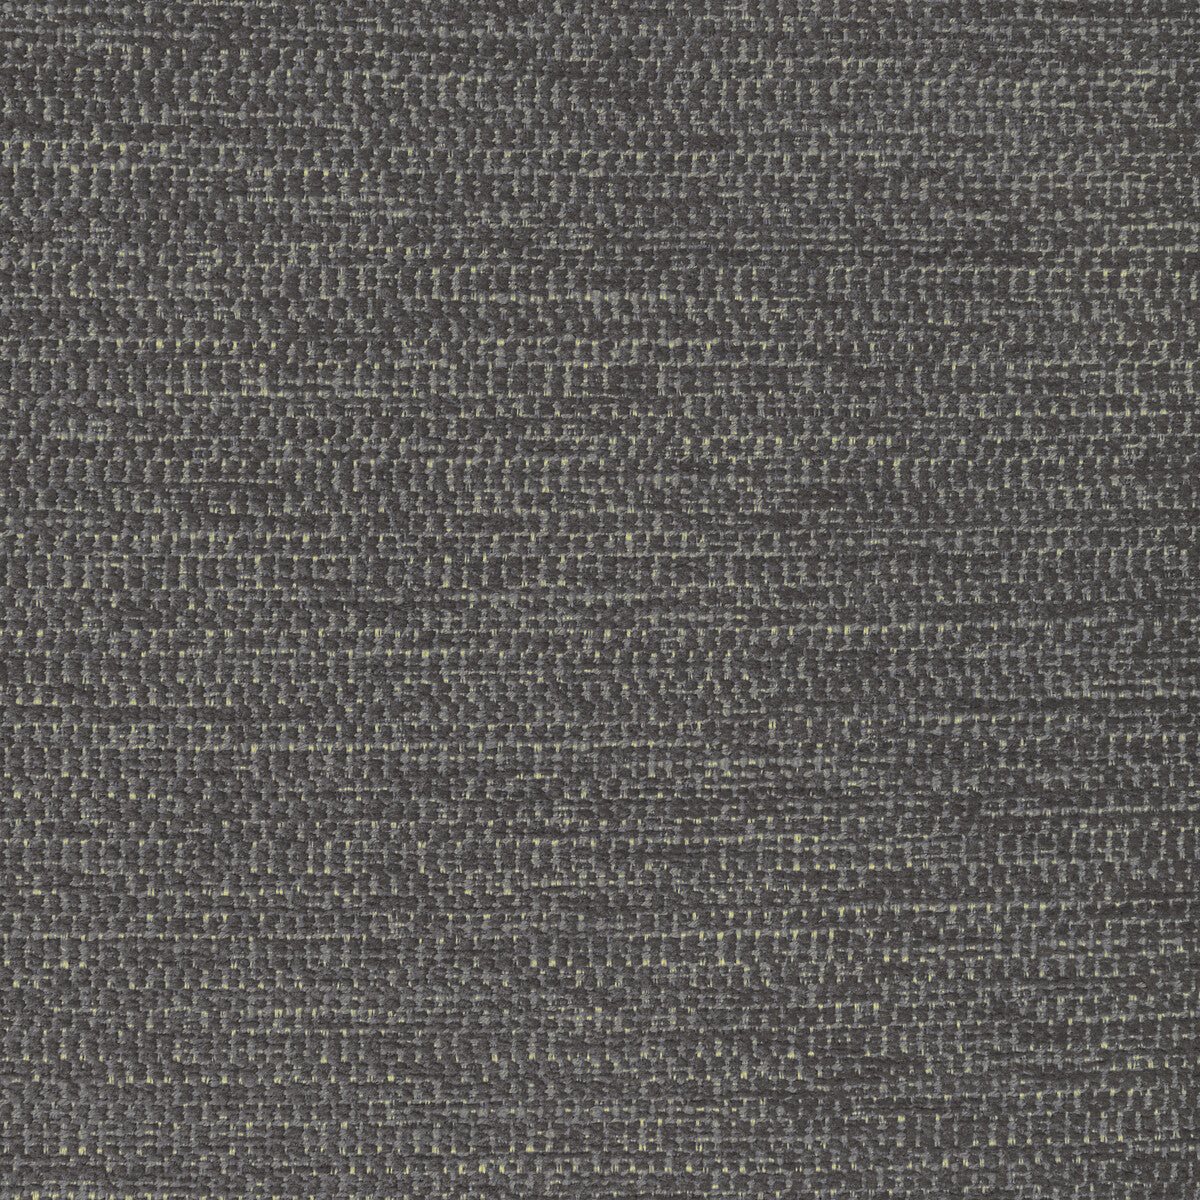 Recoup fabric in dolphin color - pattern 36569.21.0 - by Kravet Contract in the Seaqual collection